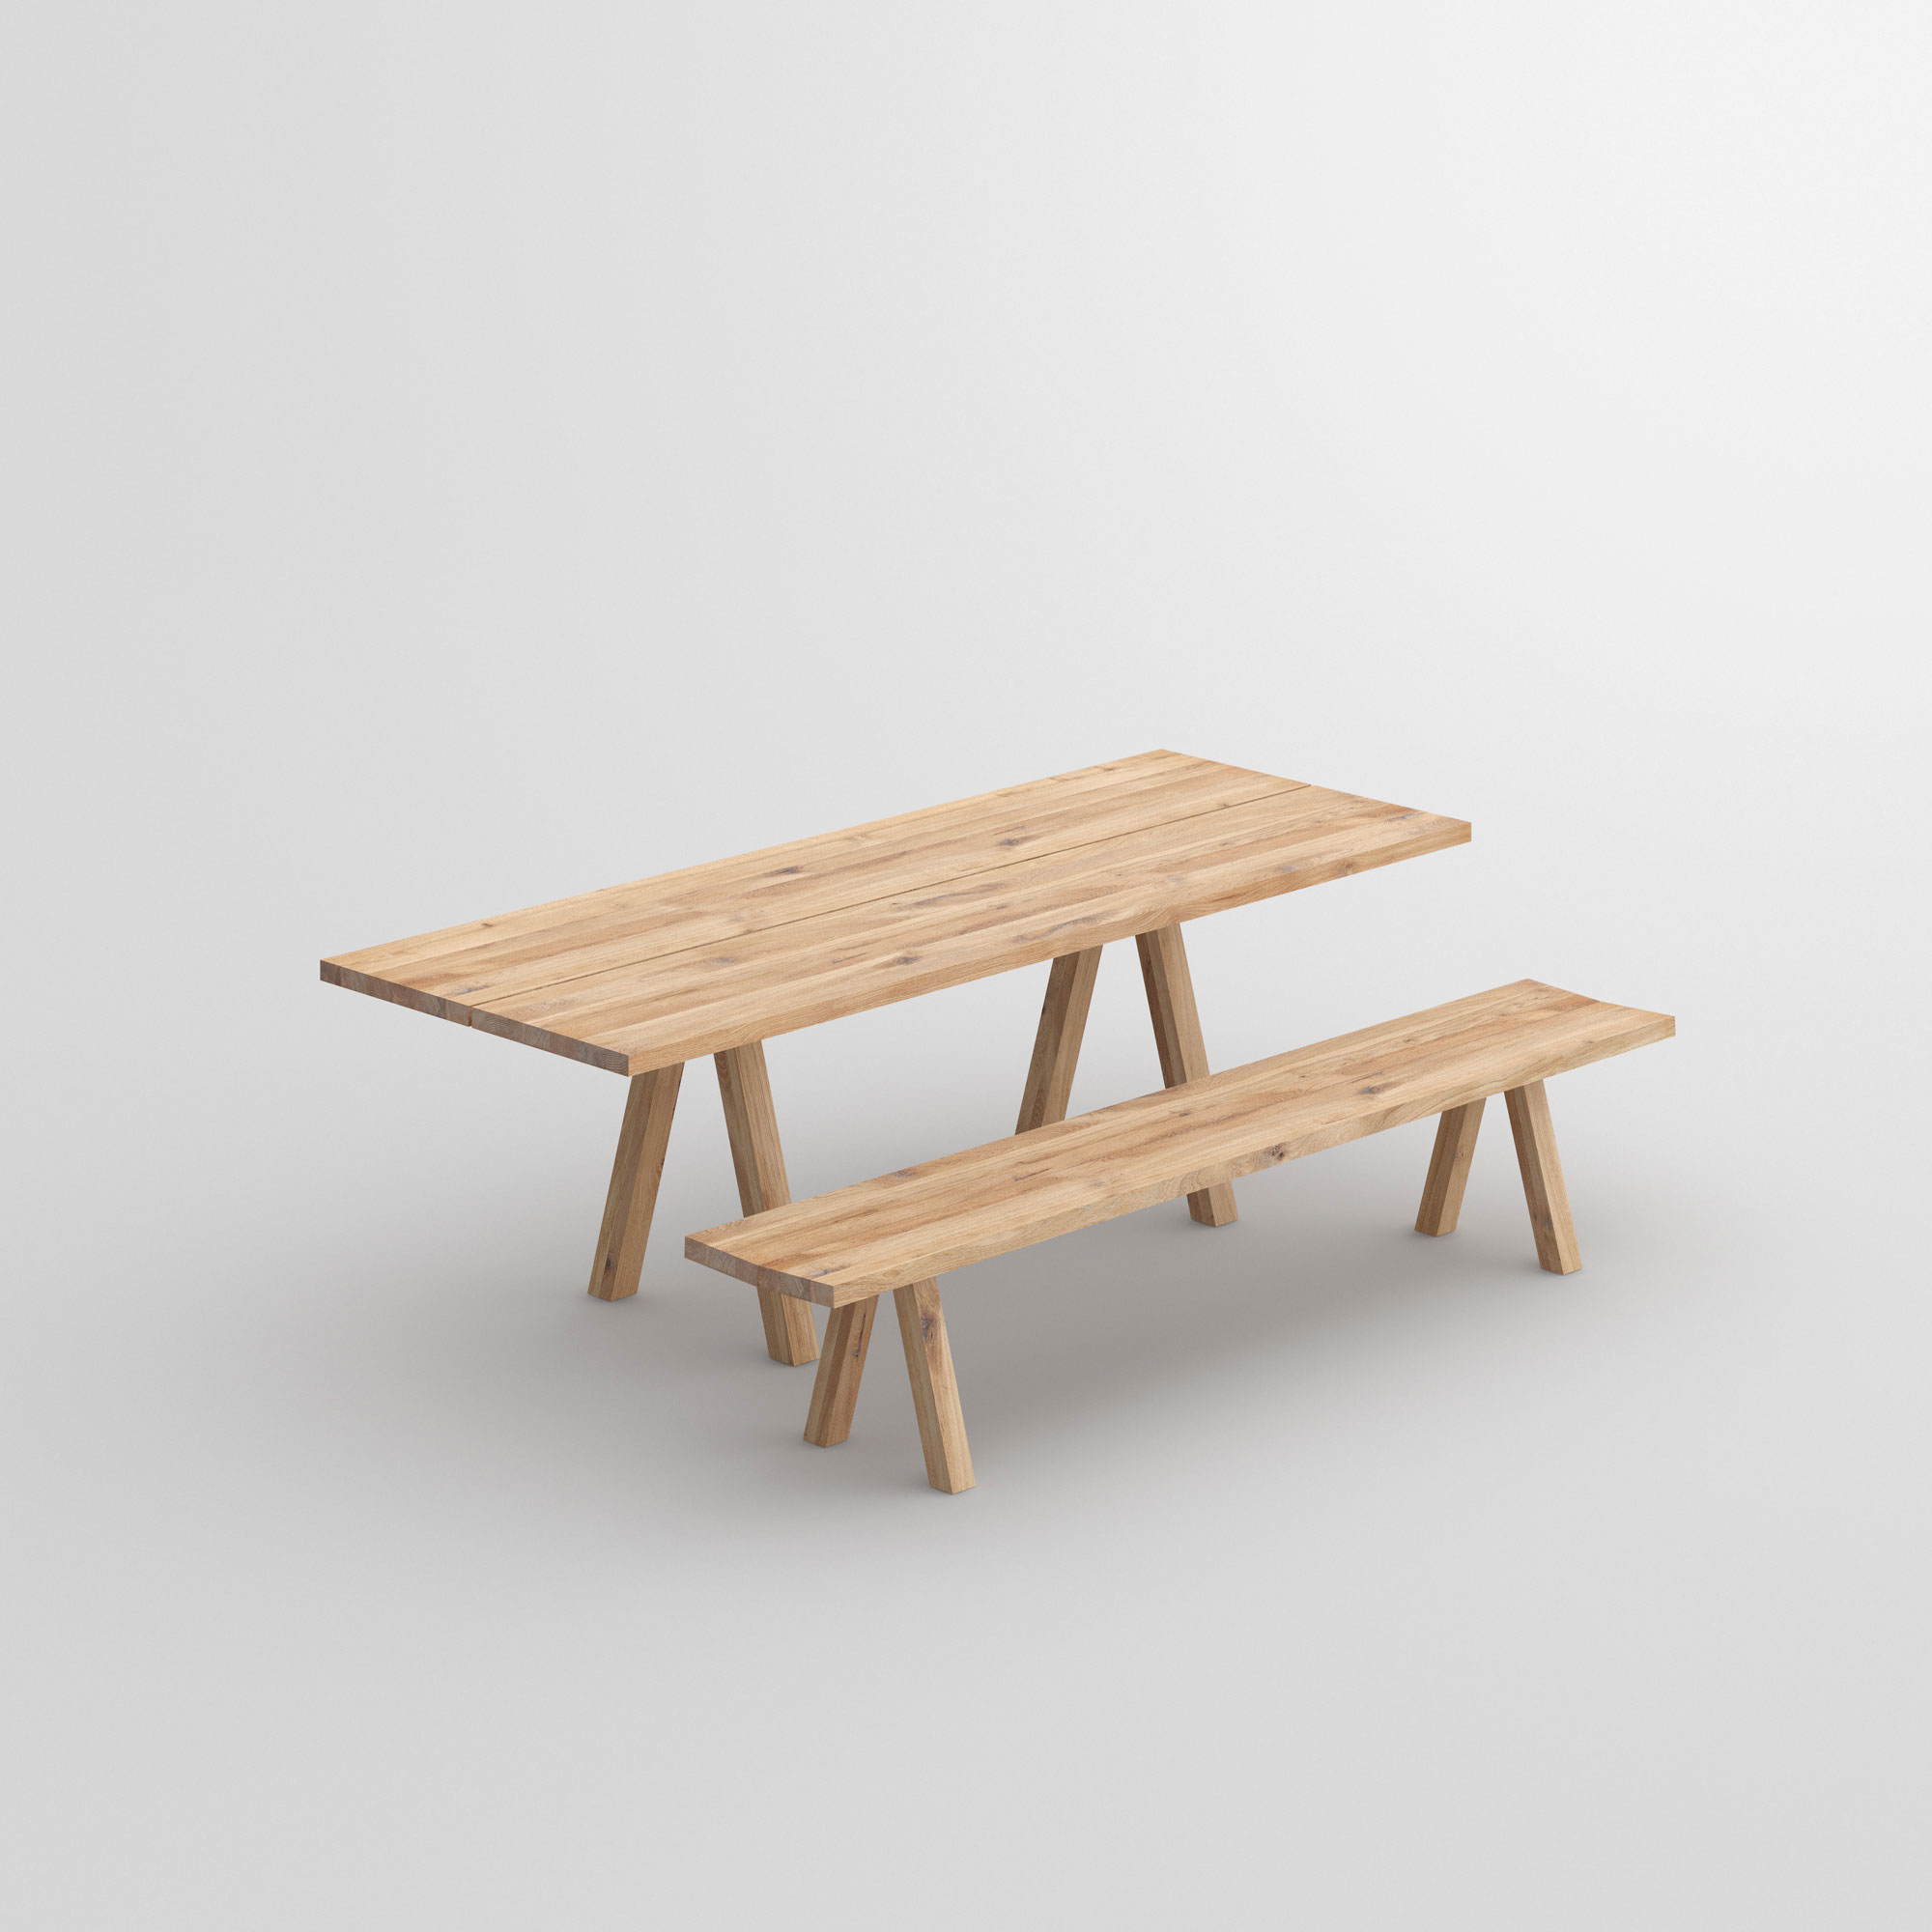 Tree Trunk Bench PAPILIO BASIC cam1 custom made in solid wood by vitamin design